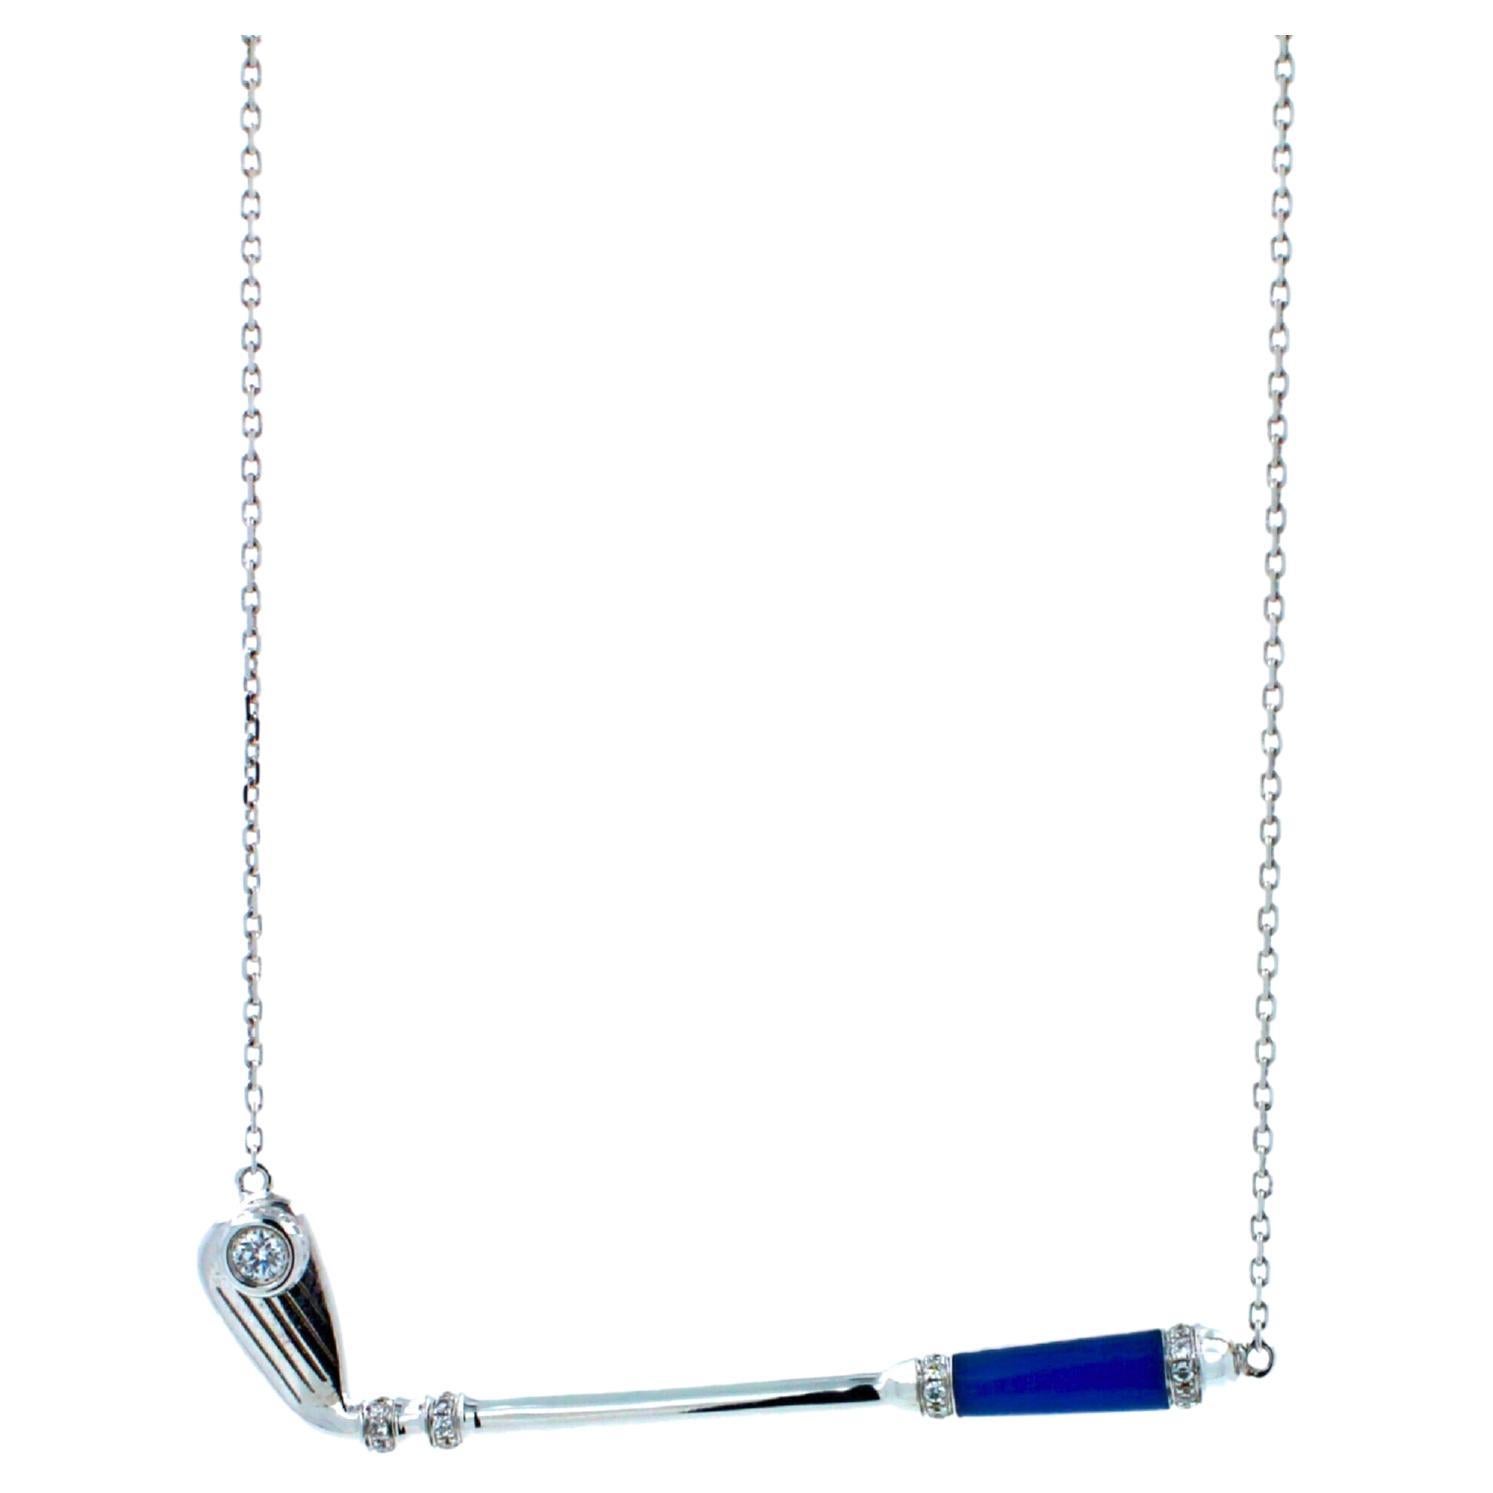 18K White Gold
Blue Agate Gemstone Handle
White Diamond Golf Ball Gemstone
0.20 cts Diamonds
16-18 inches Diamond-Cut Link Cable chain length
In-Stock
This is part of Galt & Bro. Jewelry's exclusive, custom made-to-order Golf Club Birdies